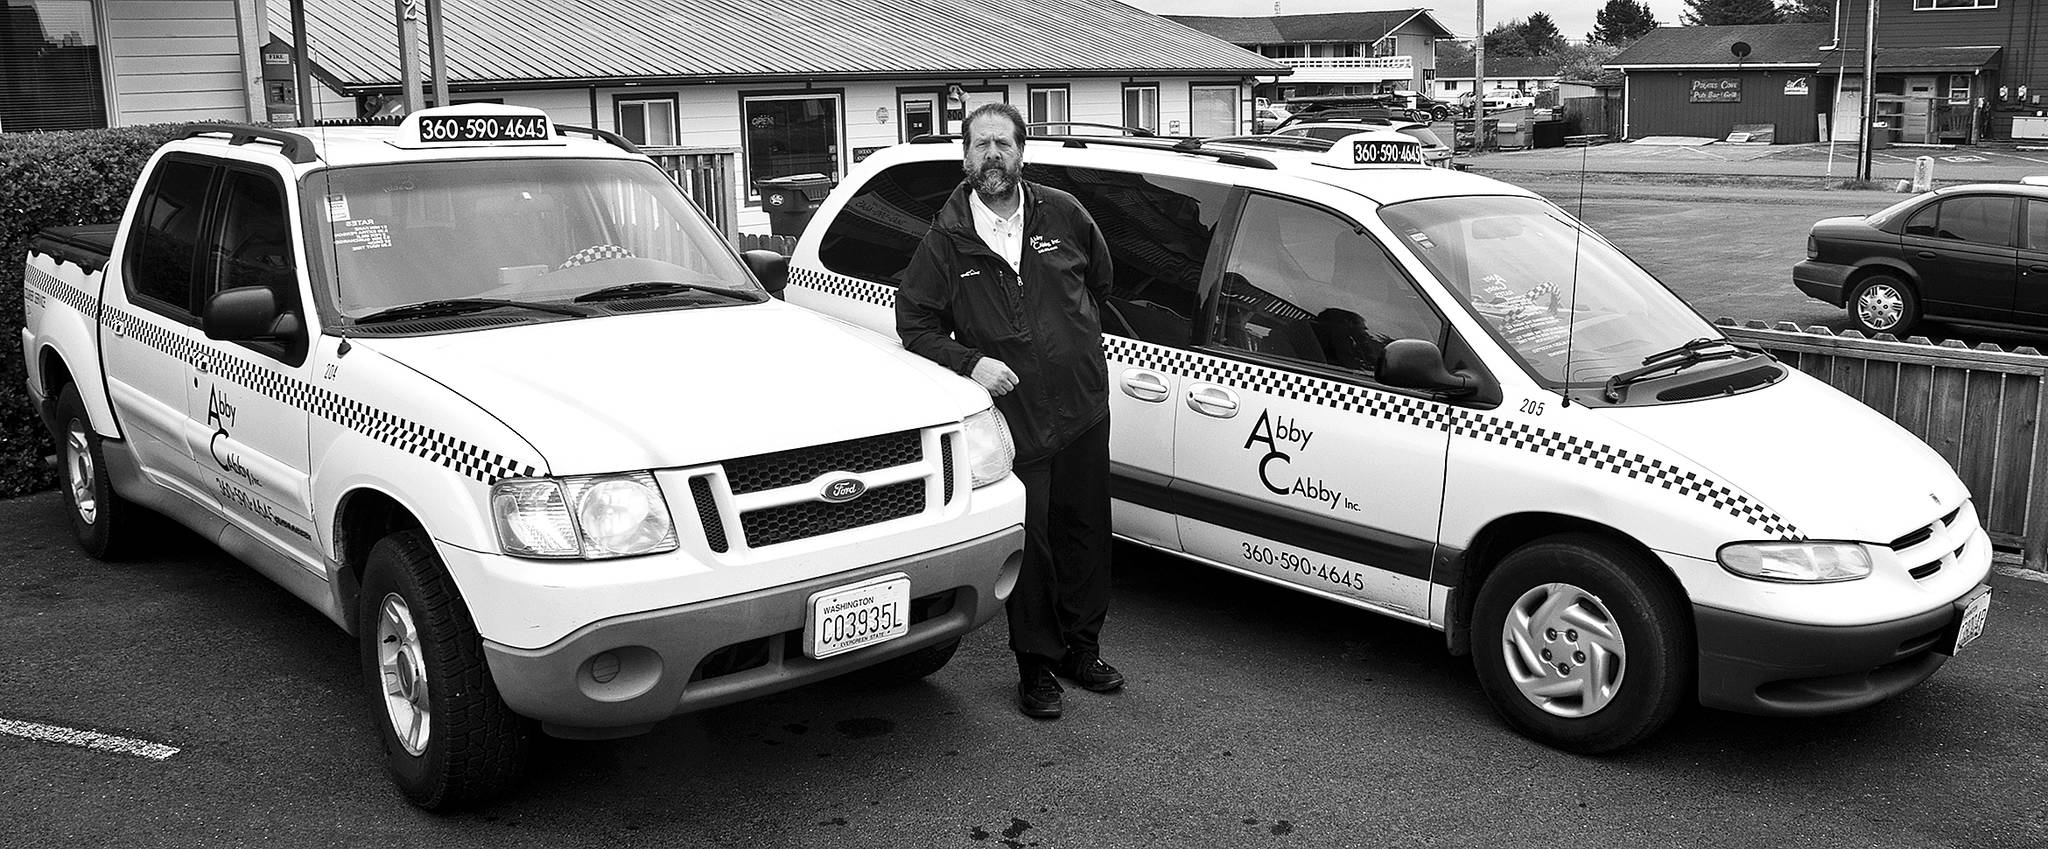 (Scott D. Johnson | Grays Harbor News Group) Abby Cabby General Manager Jim Monroe with part of the Abby Cabby fleet in front of the taxi service’s new North Coast office at 802 Ocean Shores Blvd. NW.